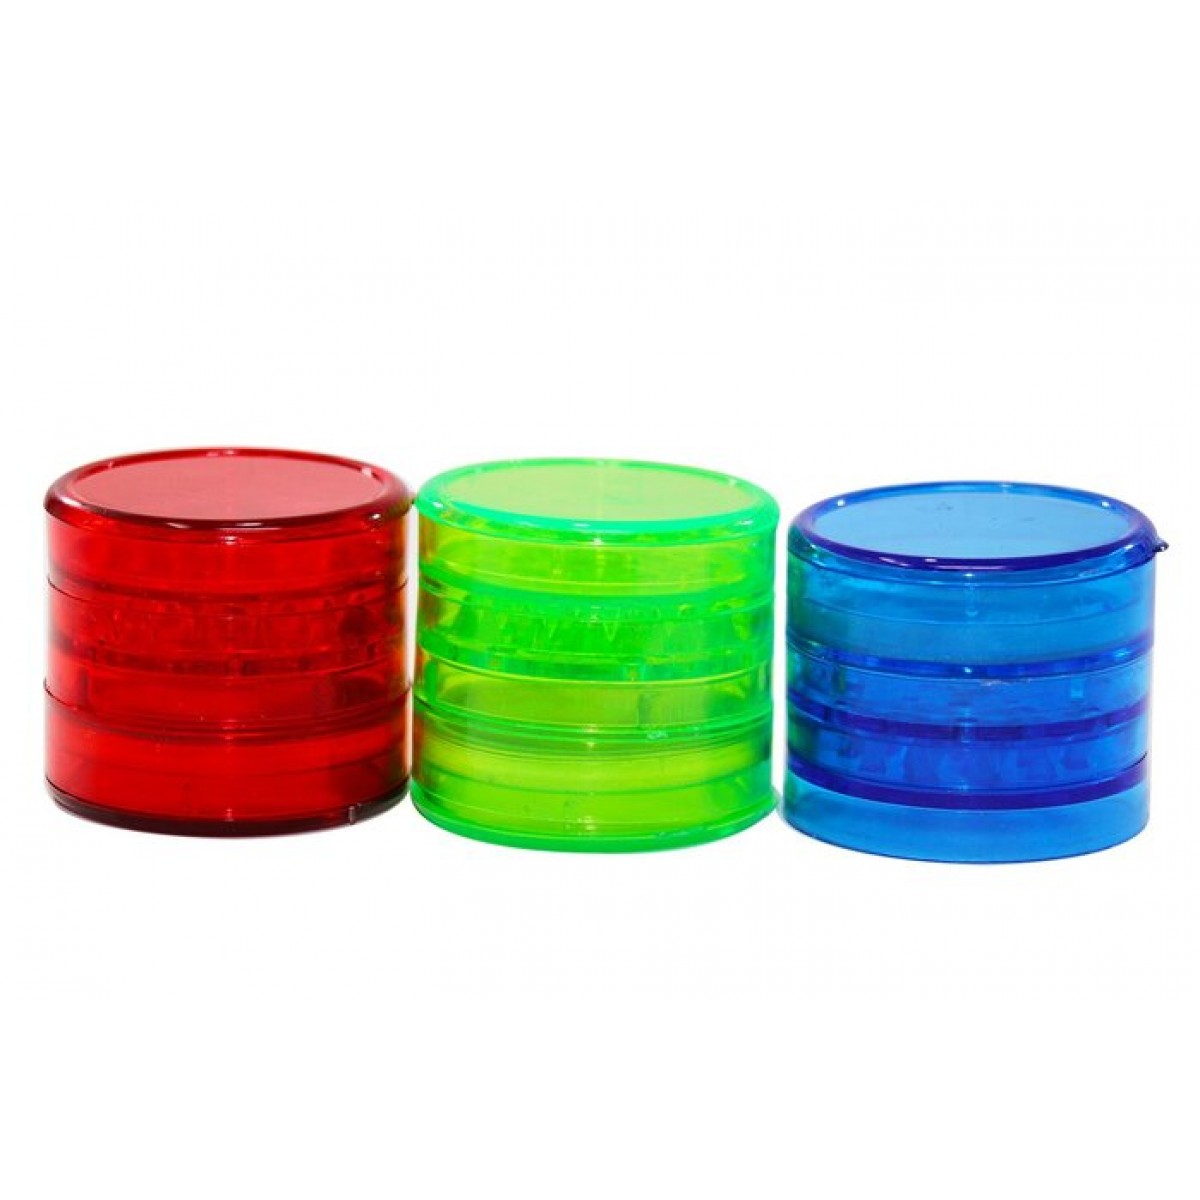 Colored Plastic 4-part Rounded Grinder (Large)